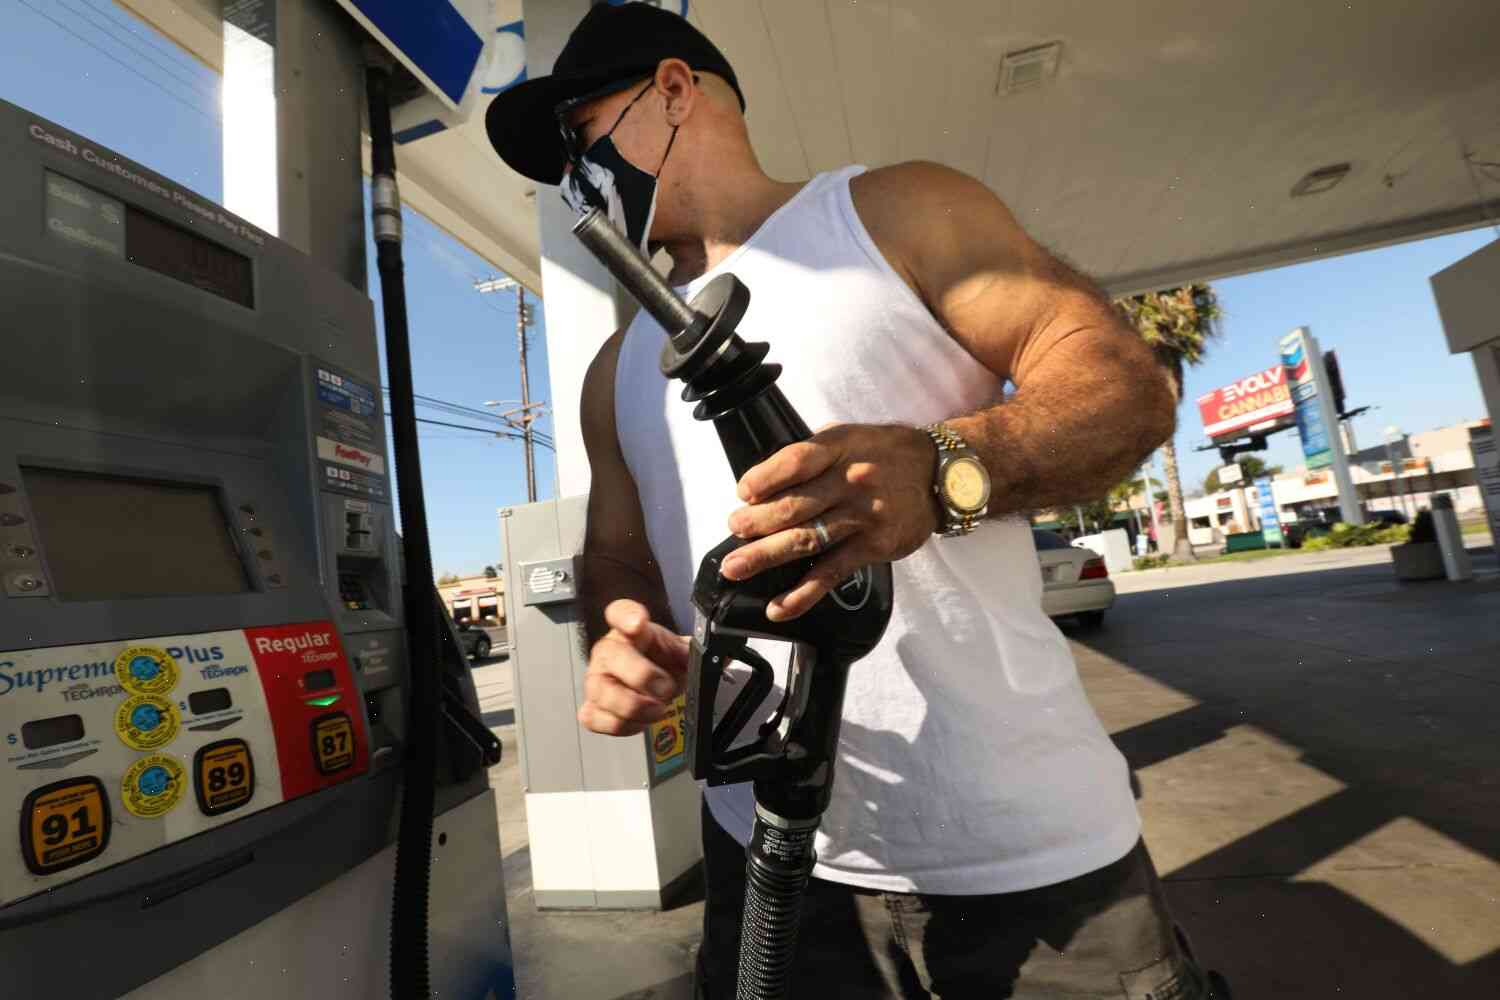 California drivers are paying more for gas than any other state in the country